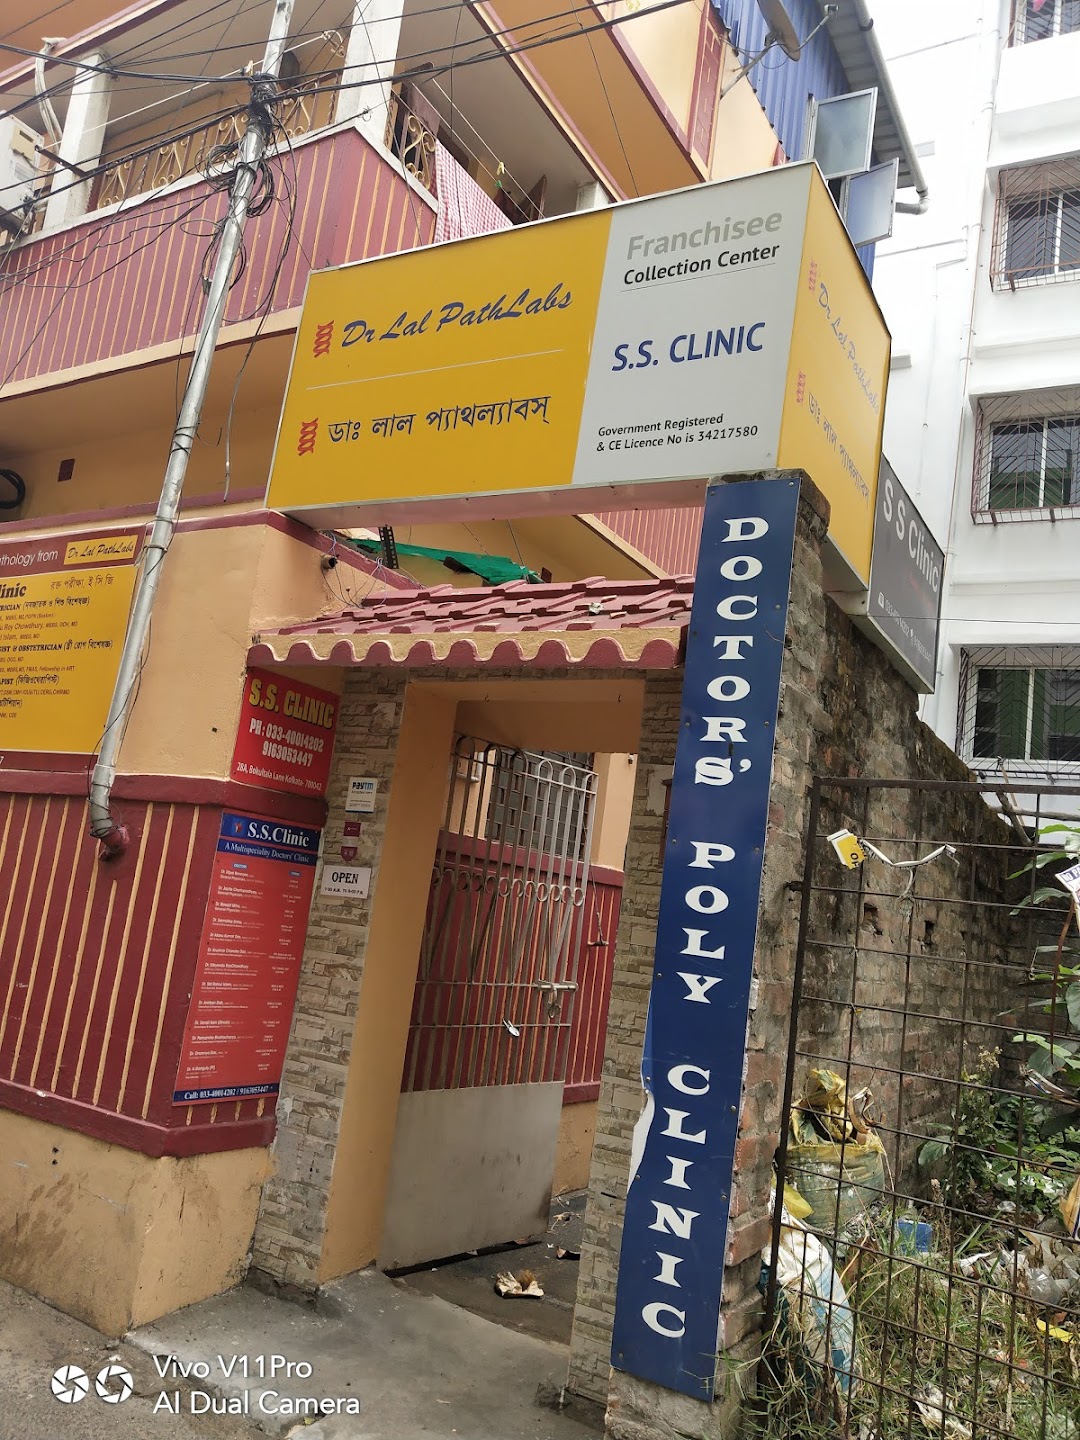 S.S. Clinic and Dr Lal PathLab